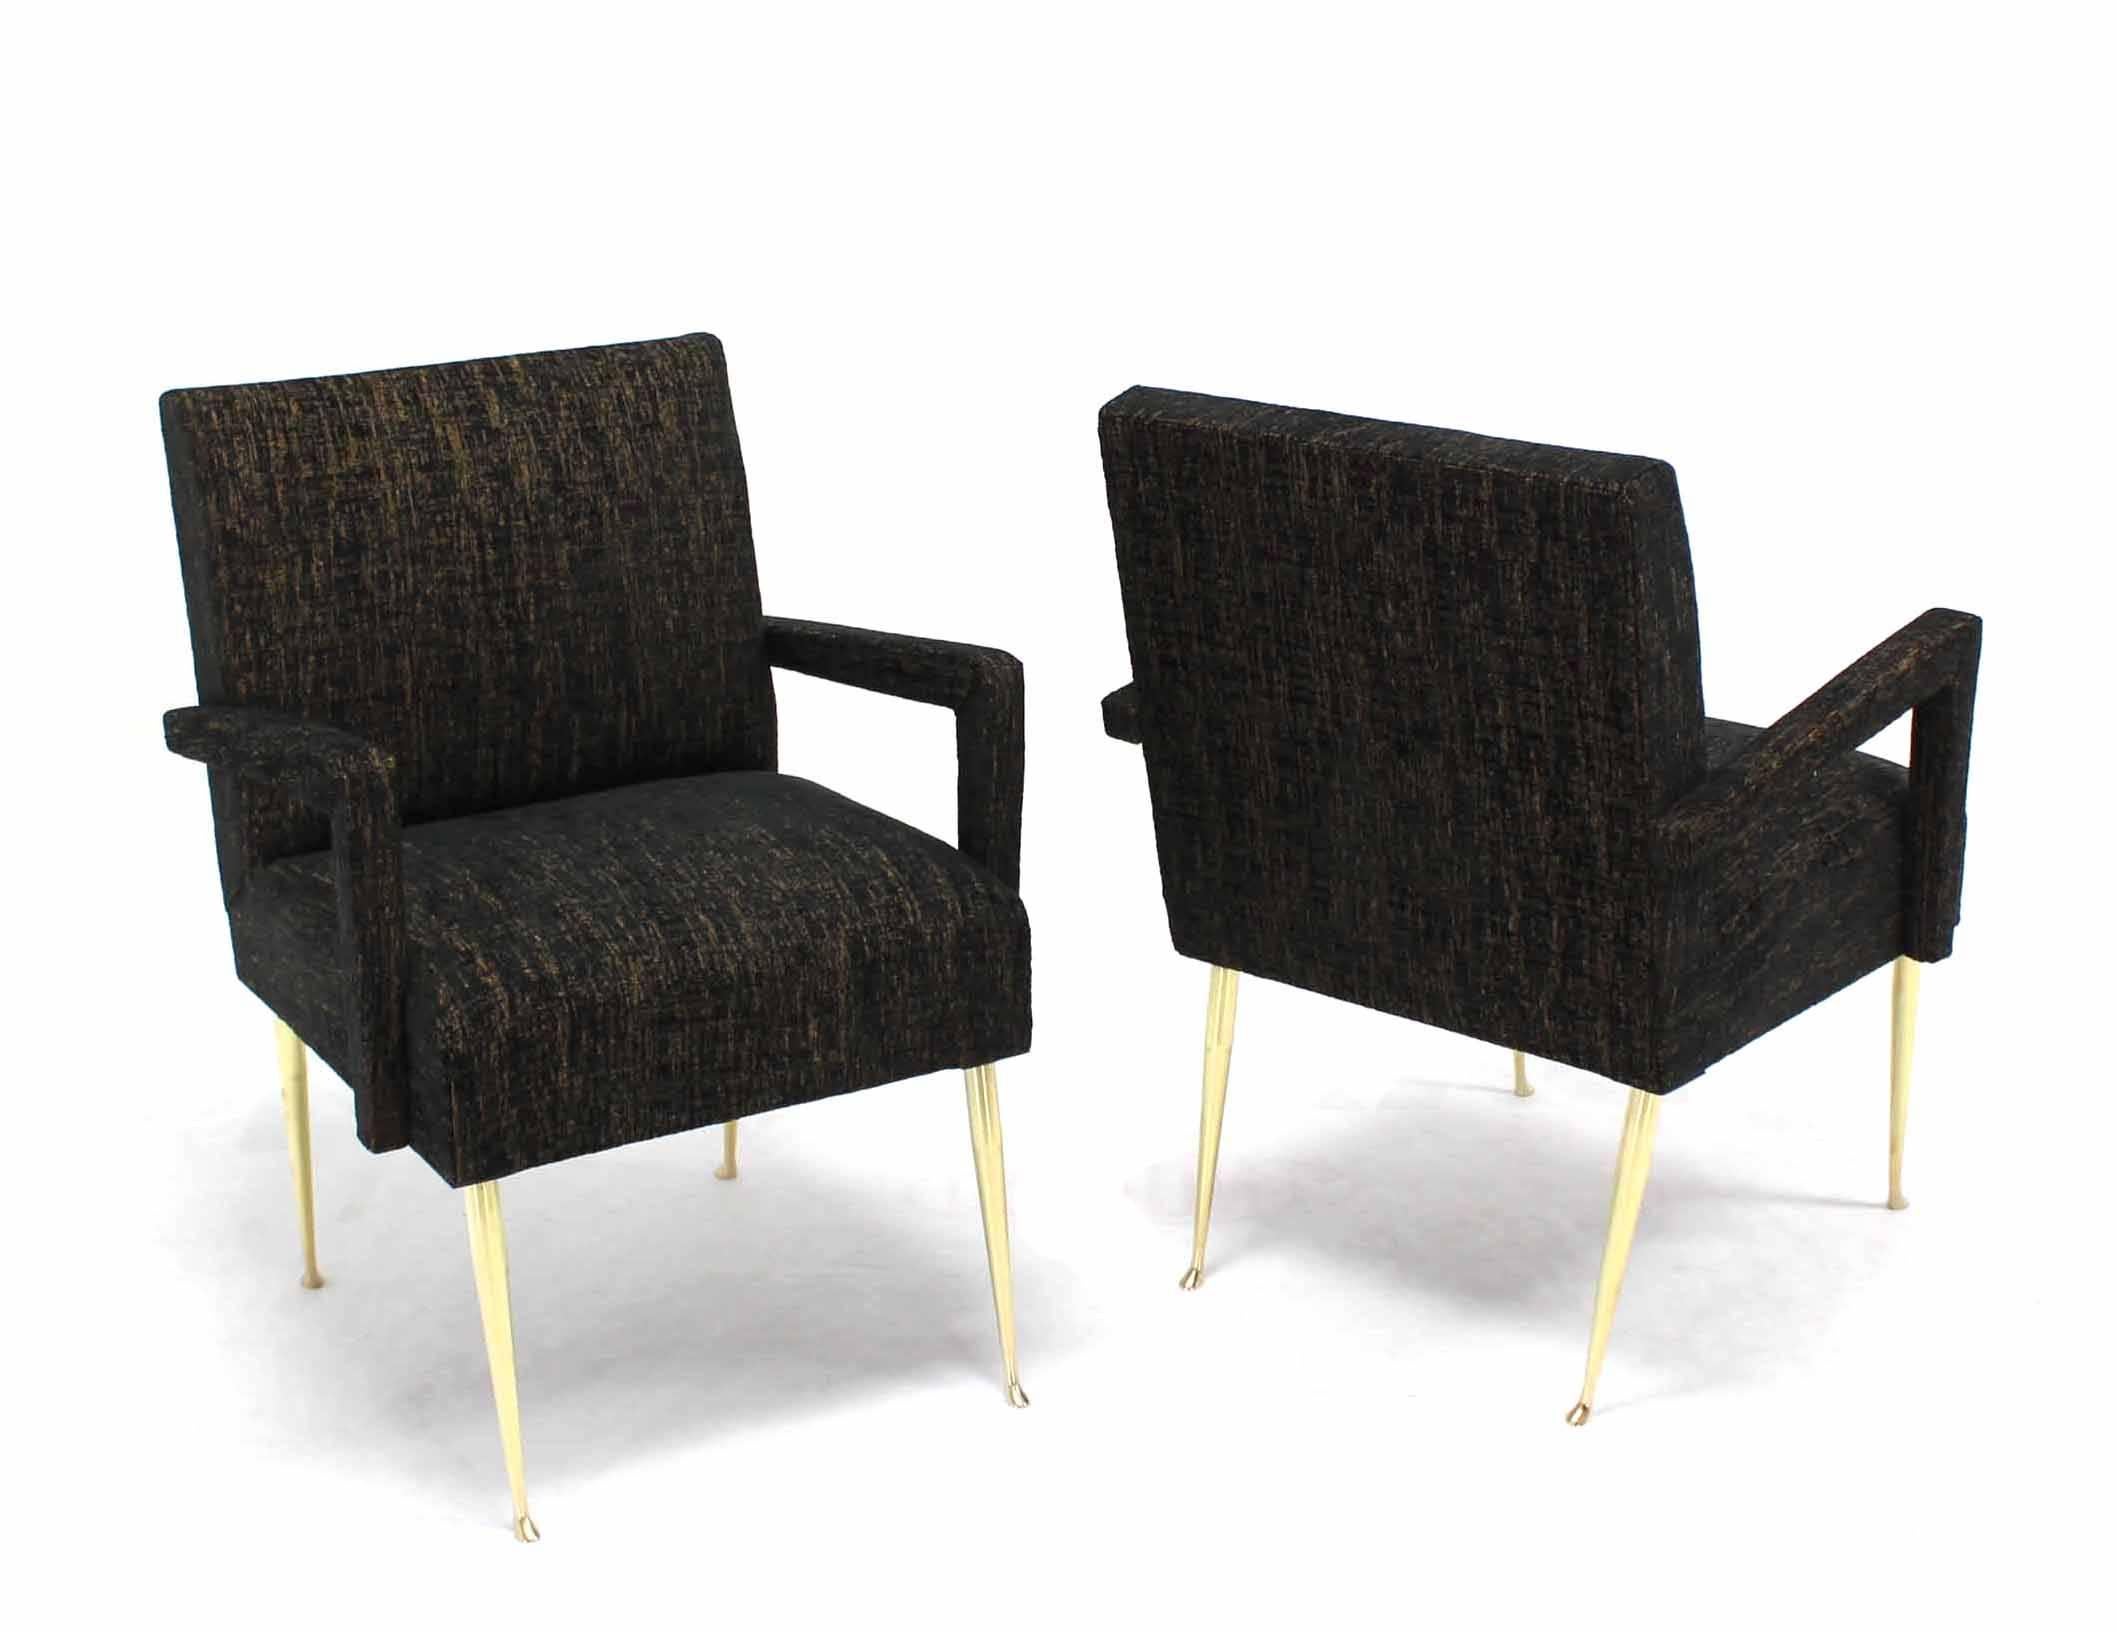 Pair of very nice Italian Mid-Century Modern lounge chairs on solid brass legs. New two-tone black and gold upholstery.